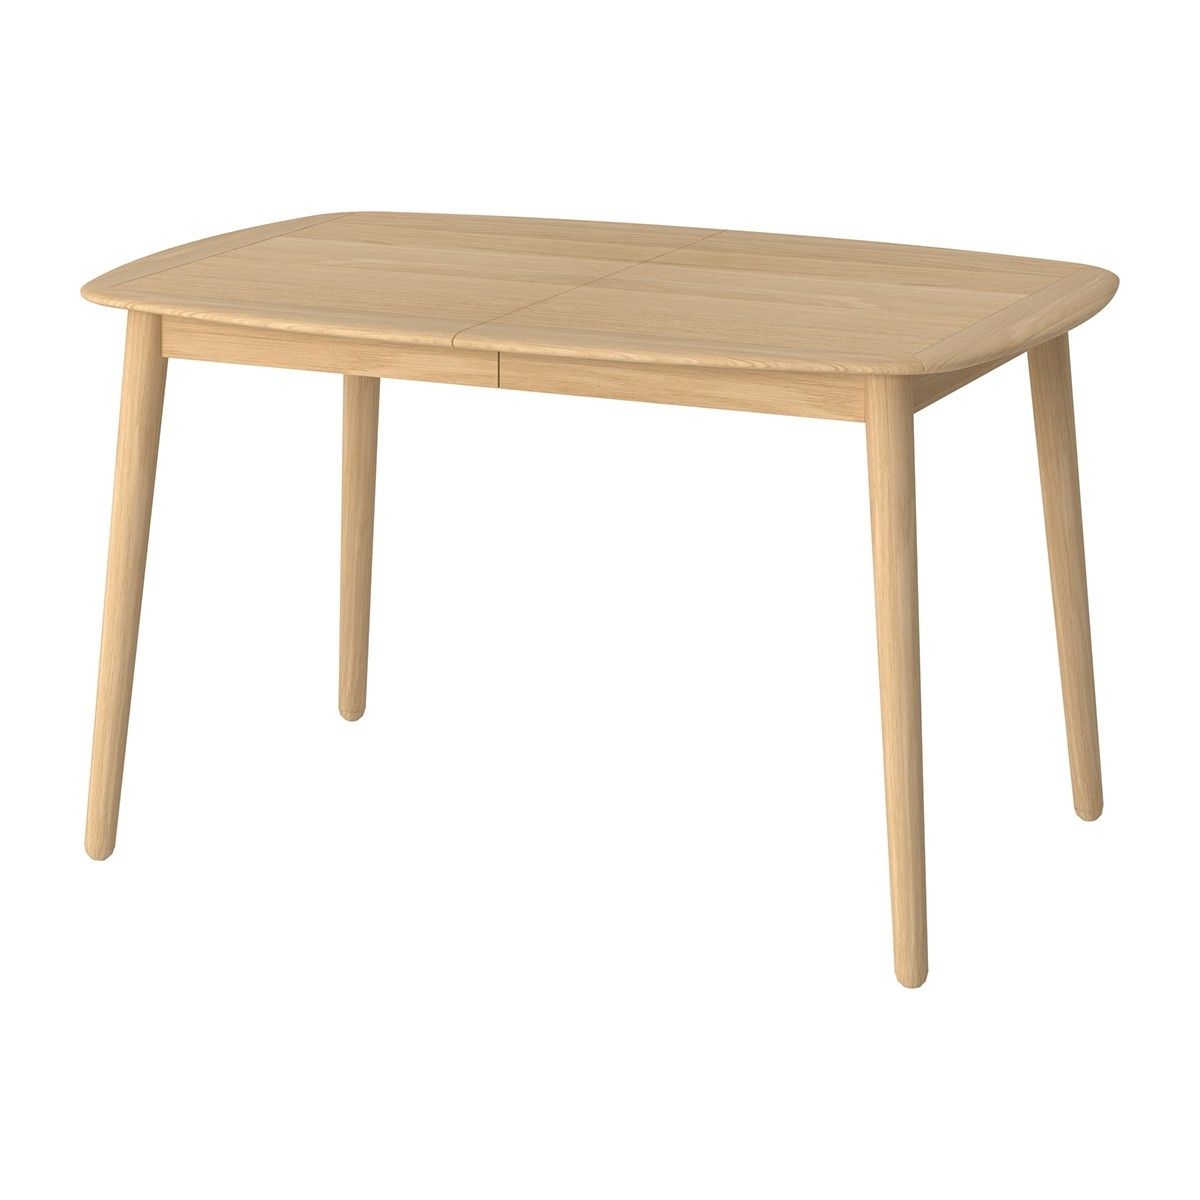 Most Popular Extension Dining Tables Regarding Koto Extension Dining Table (oak, Small) (View 9 of 30)